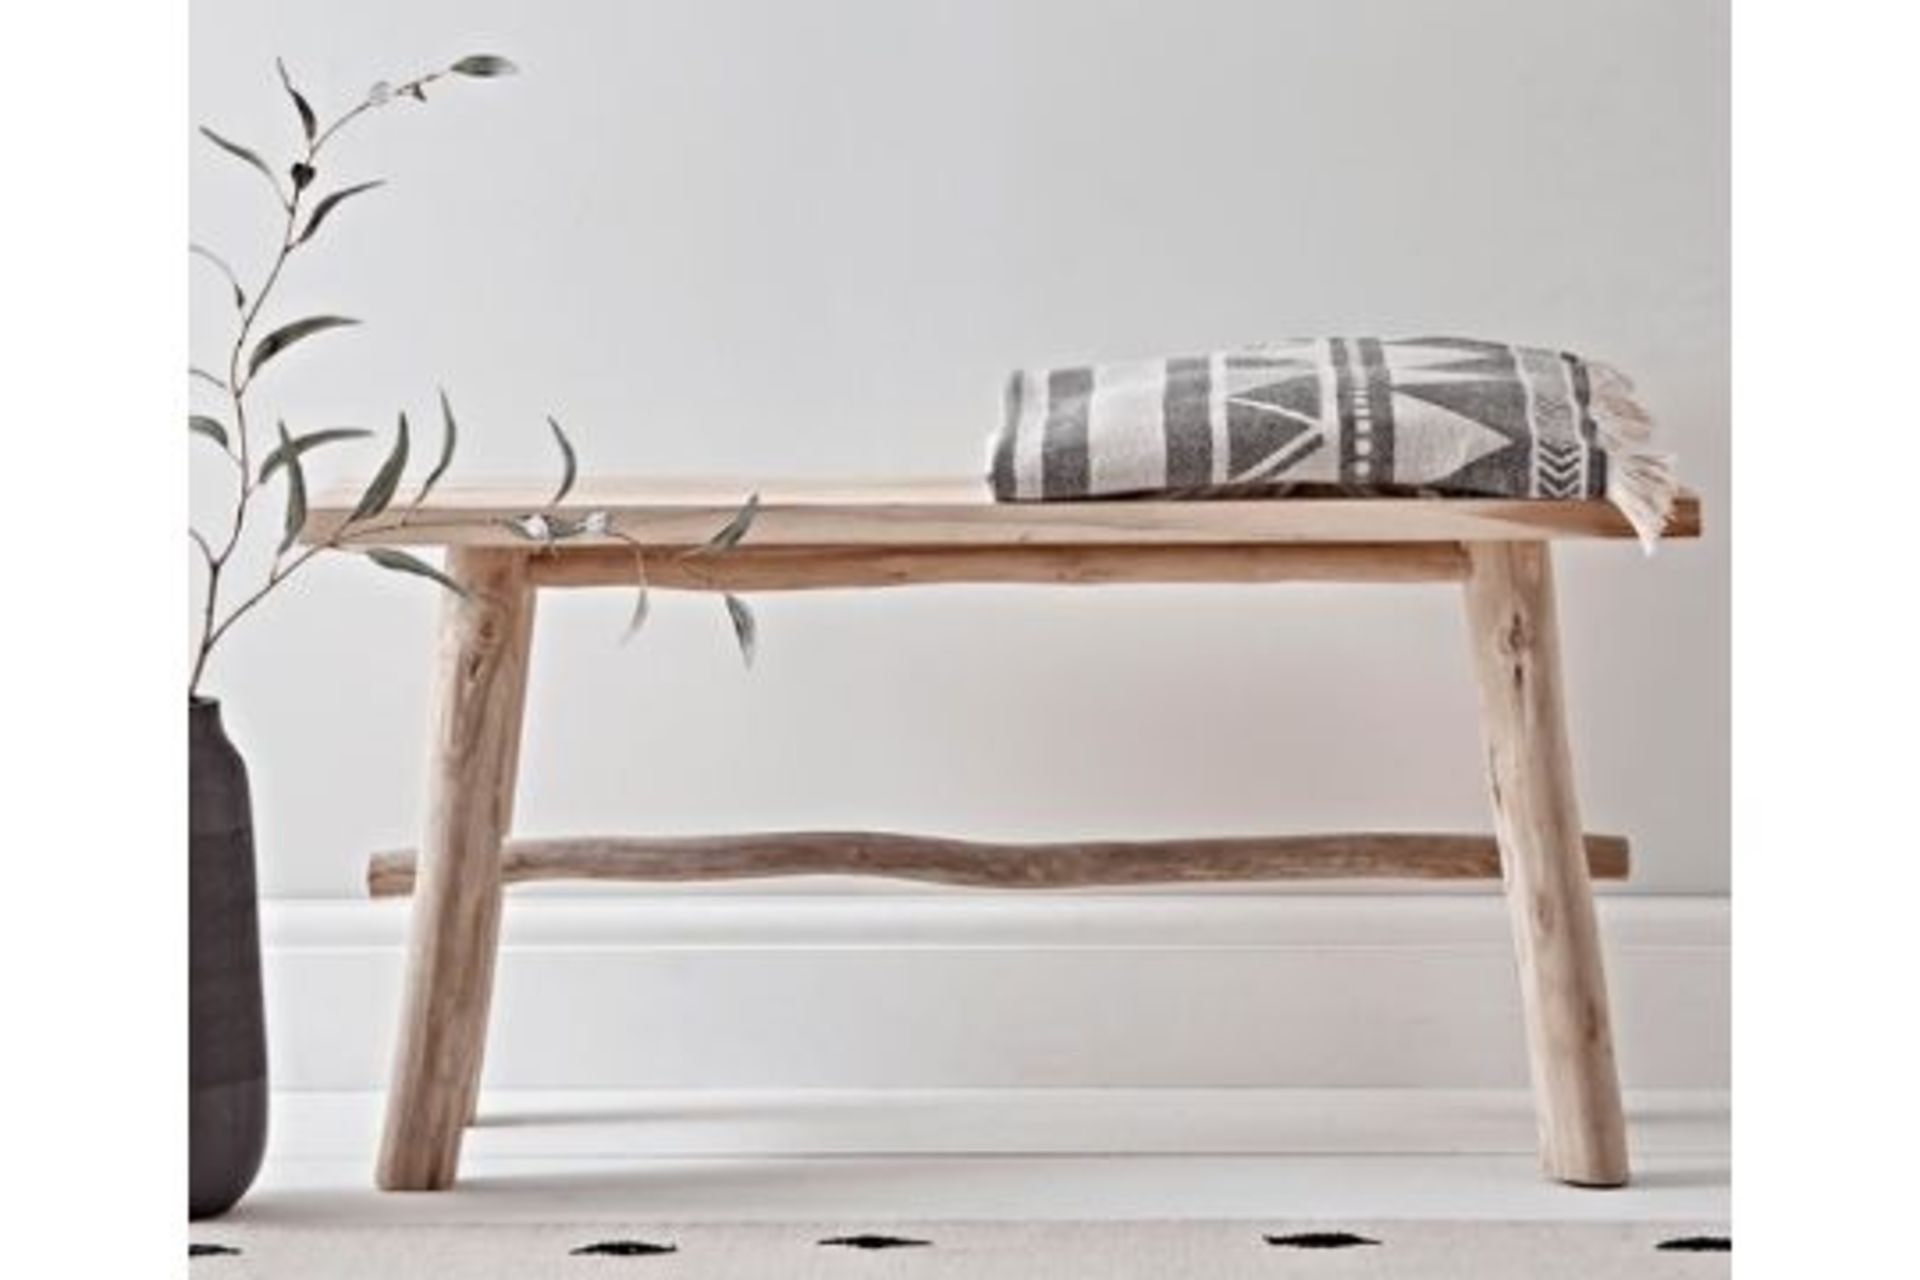 Cox & Cox Rustic Teak Bench. RRP £225. (ROW11RACK) With a fabulous driftwood style finish and rustic